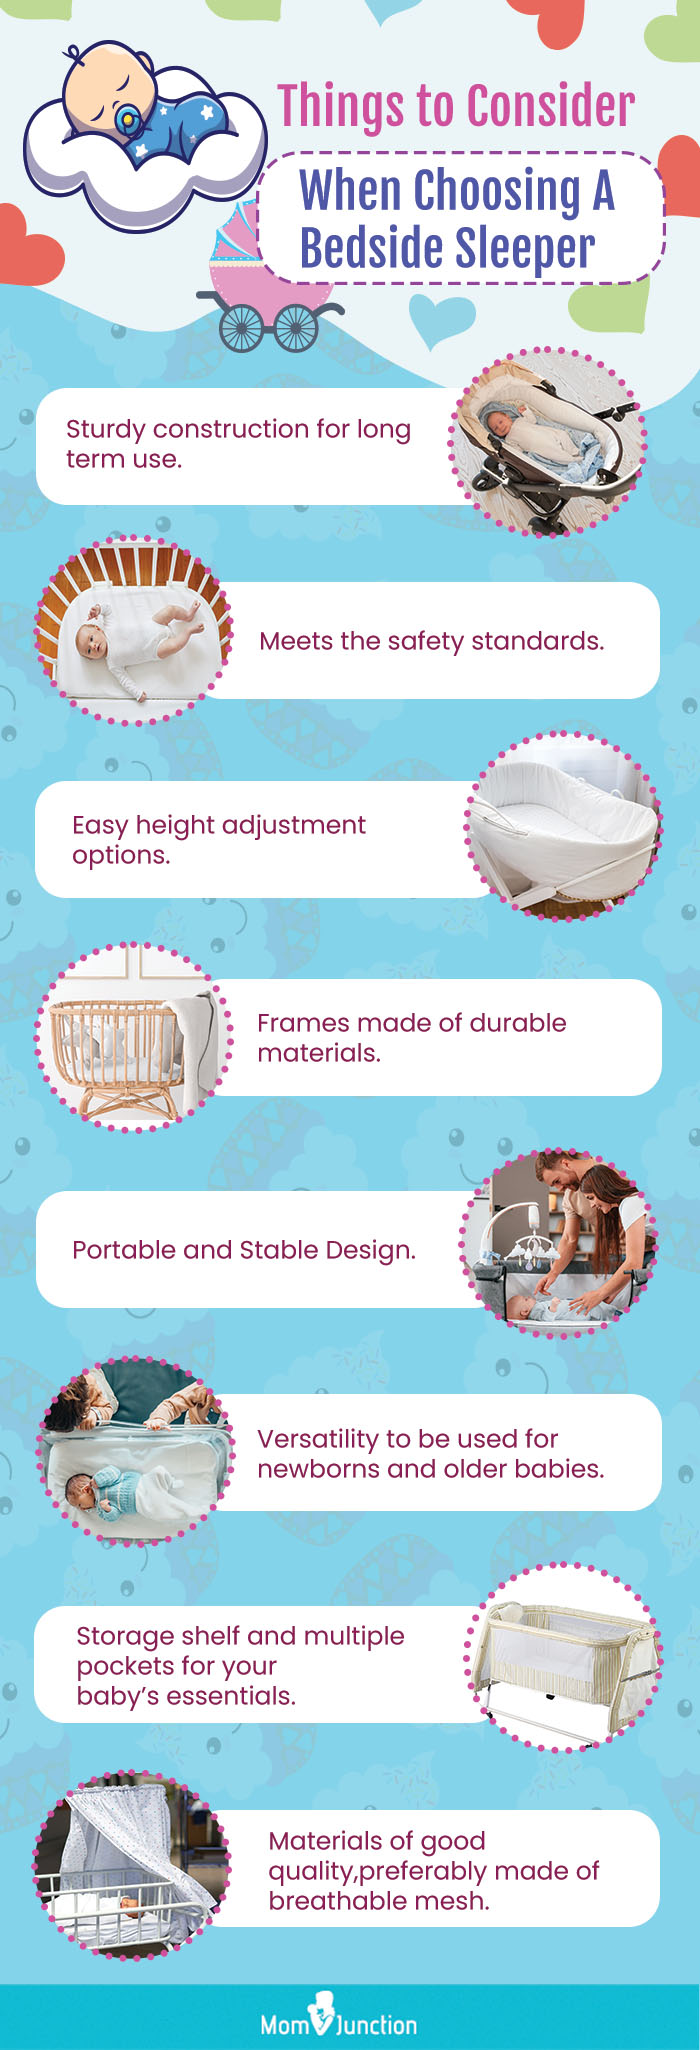 Things To Consider When Choosing A Bedtime Sleeper (infographic)